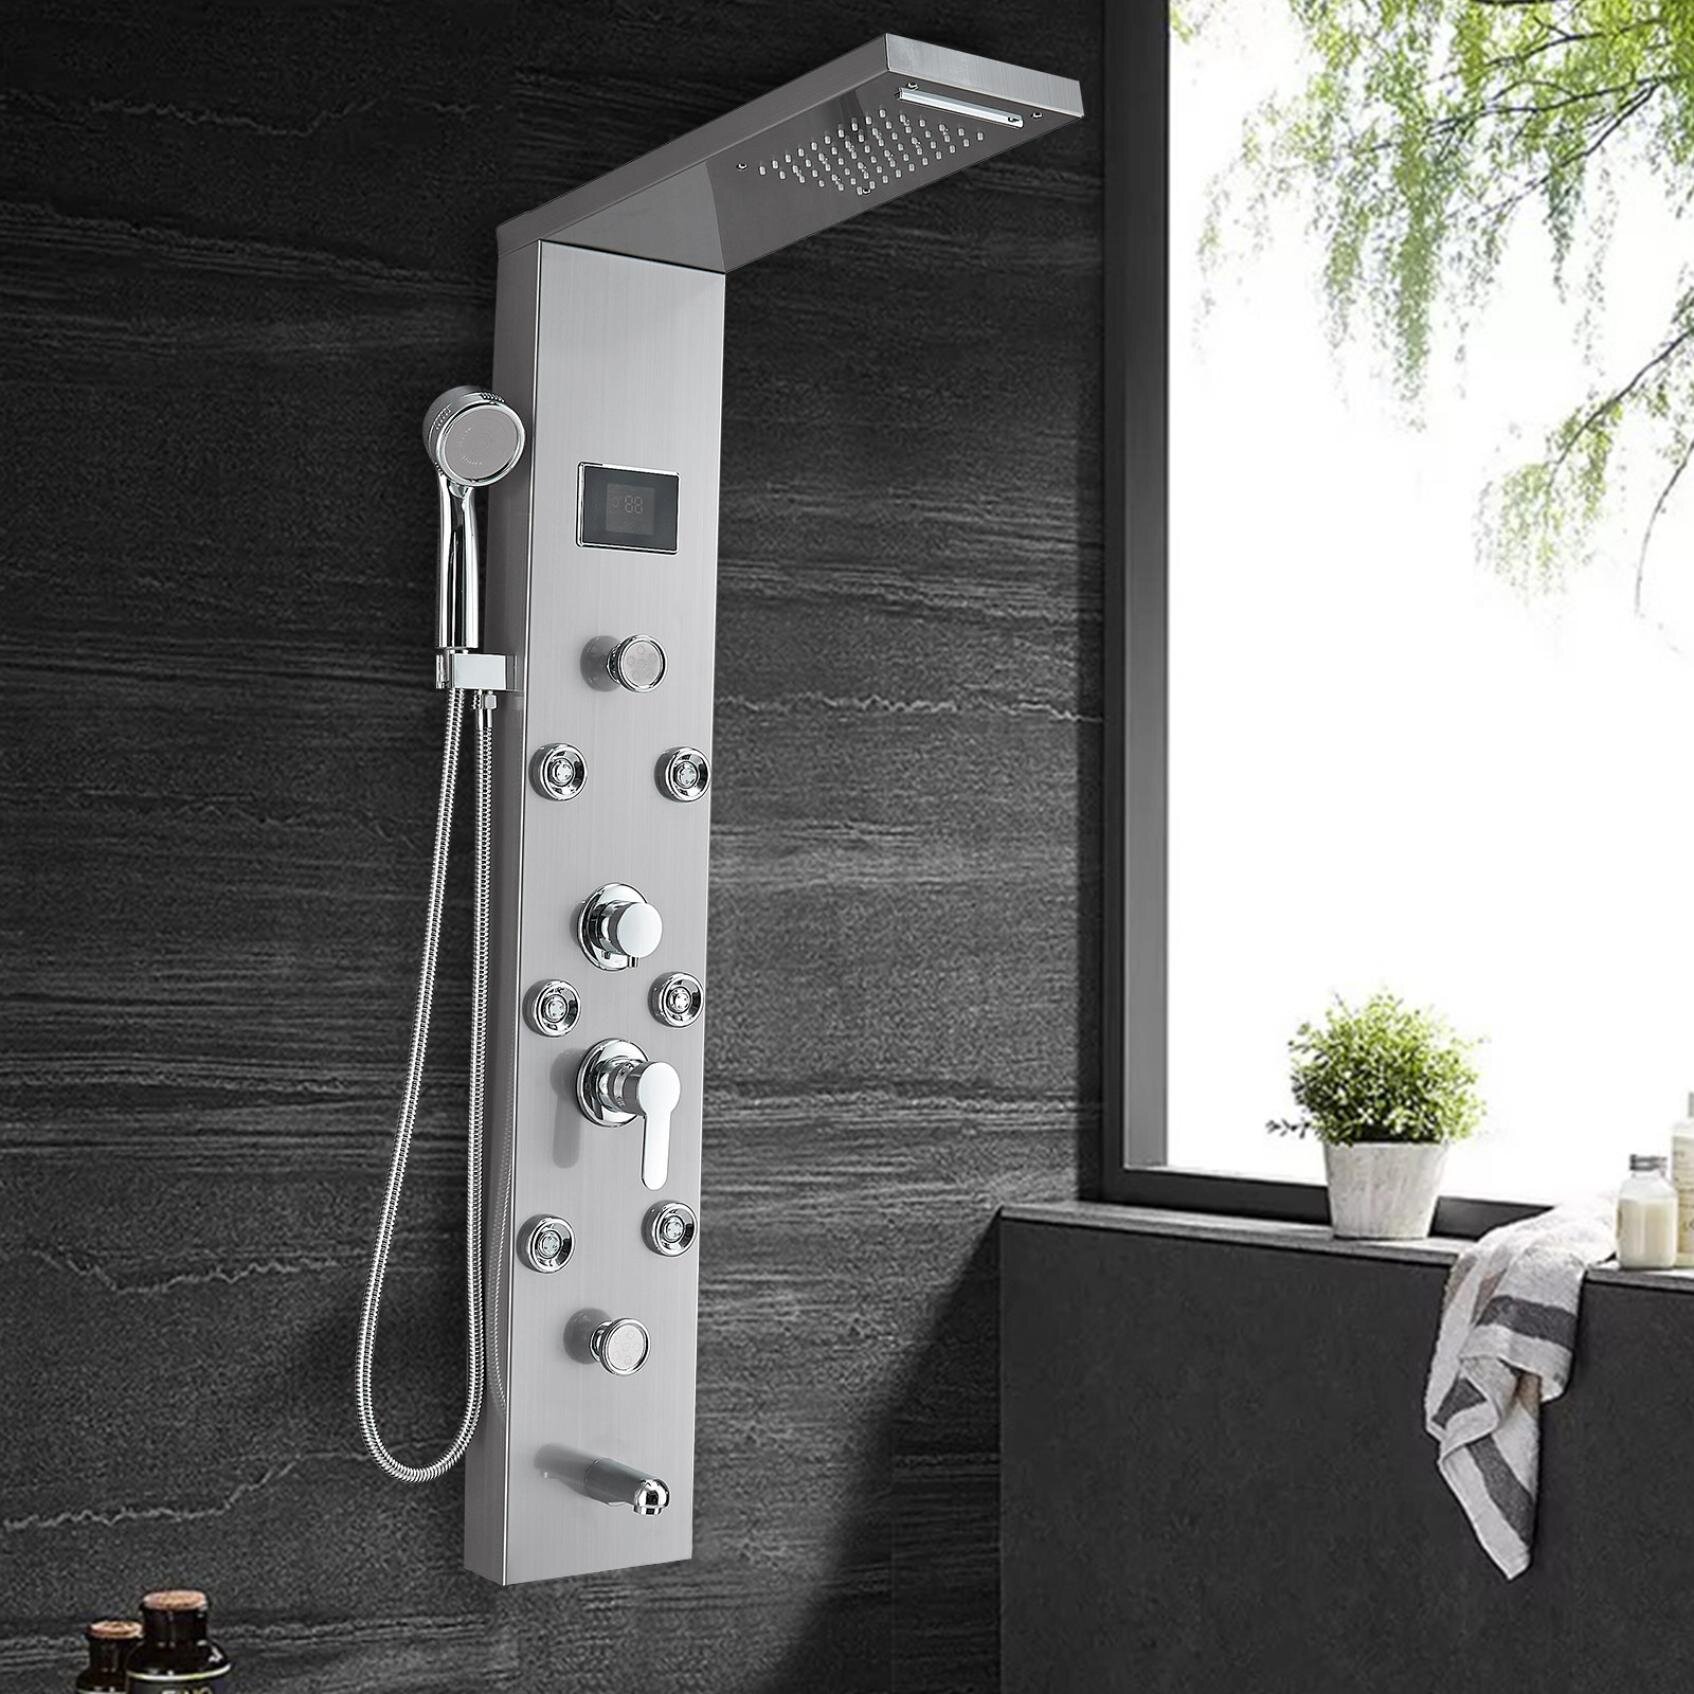 Stainless steel LED Shower Panel Tower kit Rain&Waterfall Massage Jets System